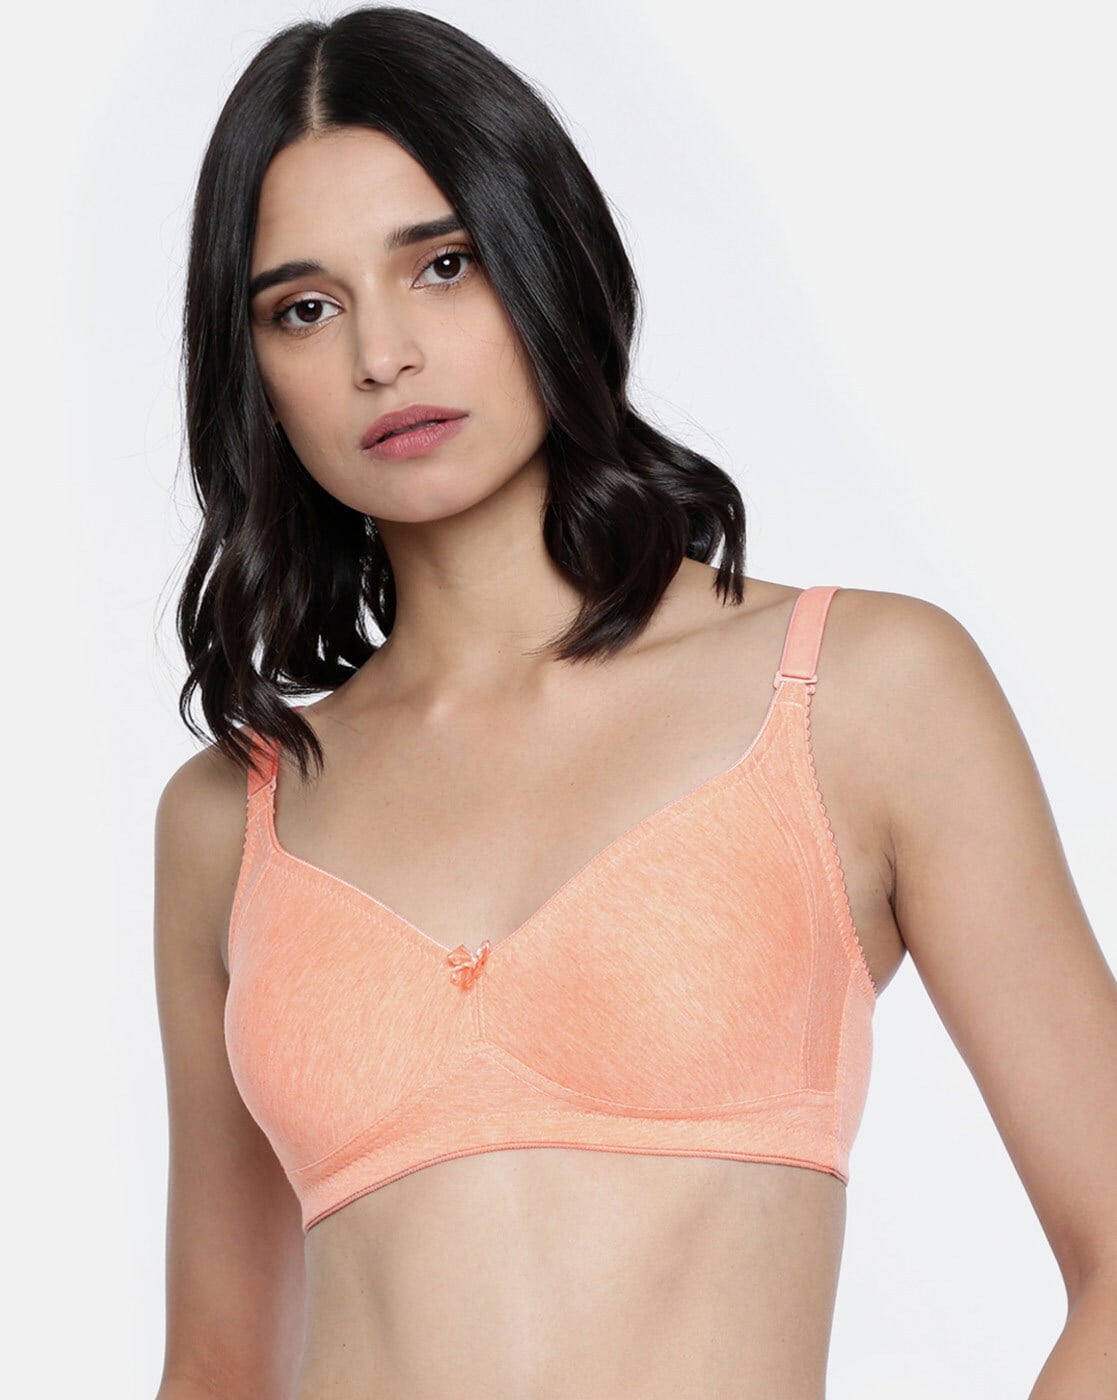 Buy online Peach Solid Minimizer Bra from lingerie for Women by